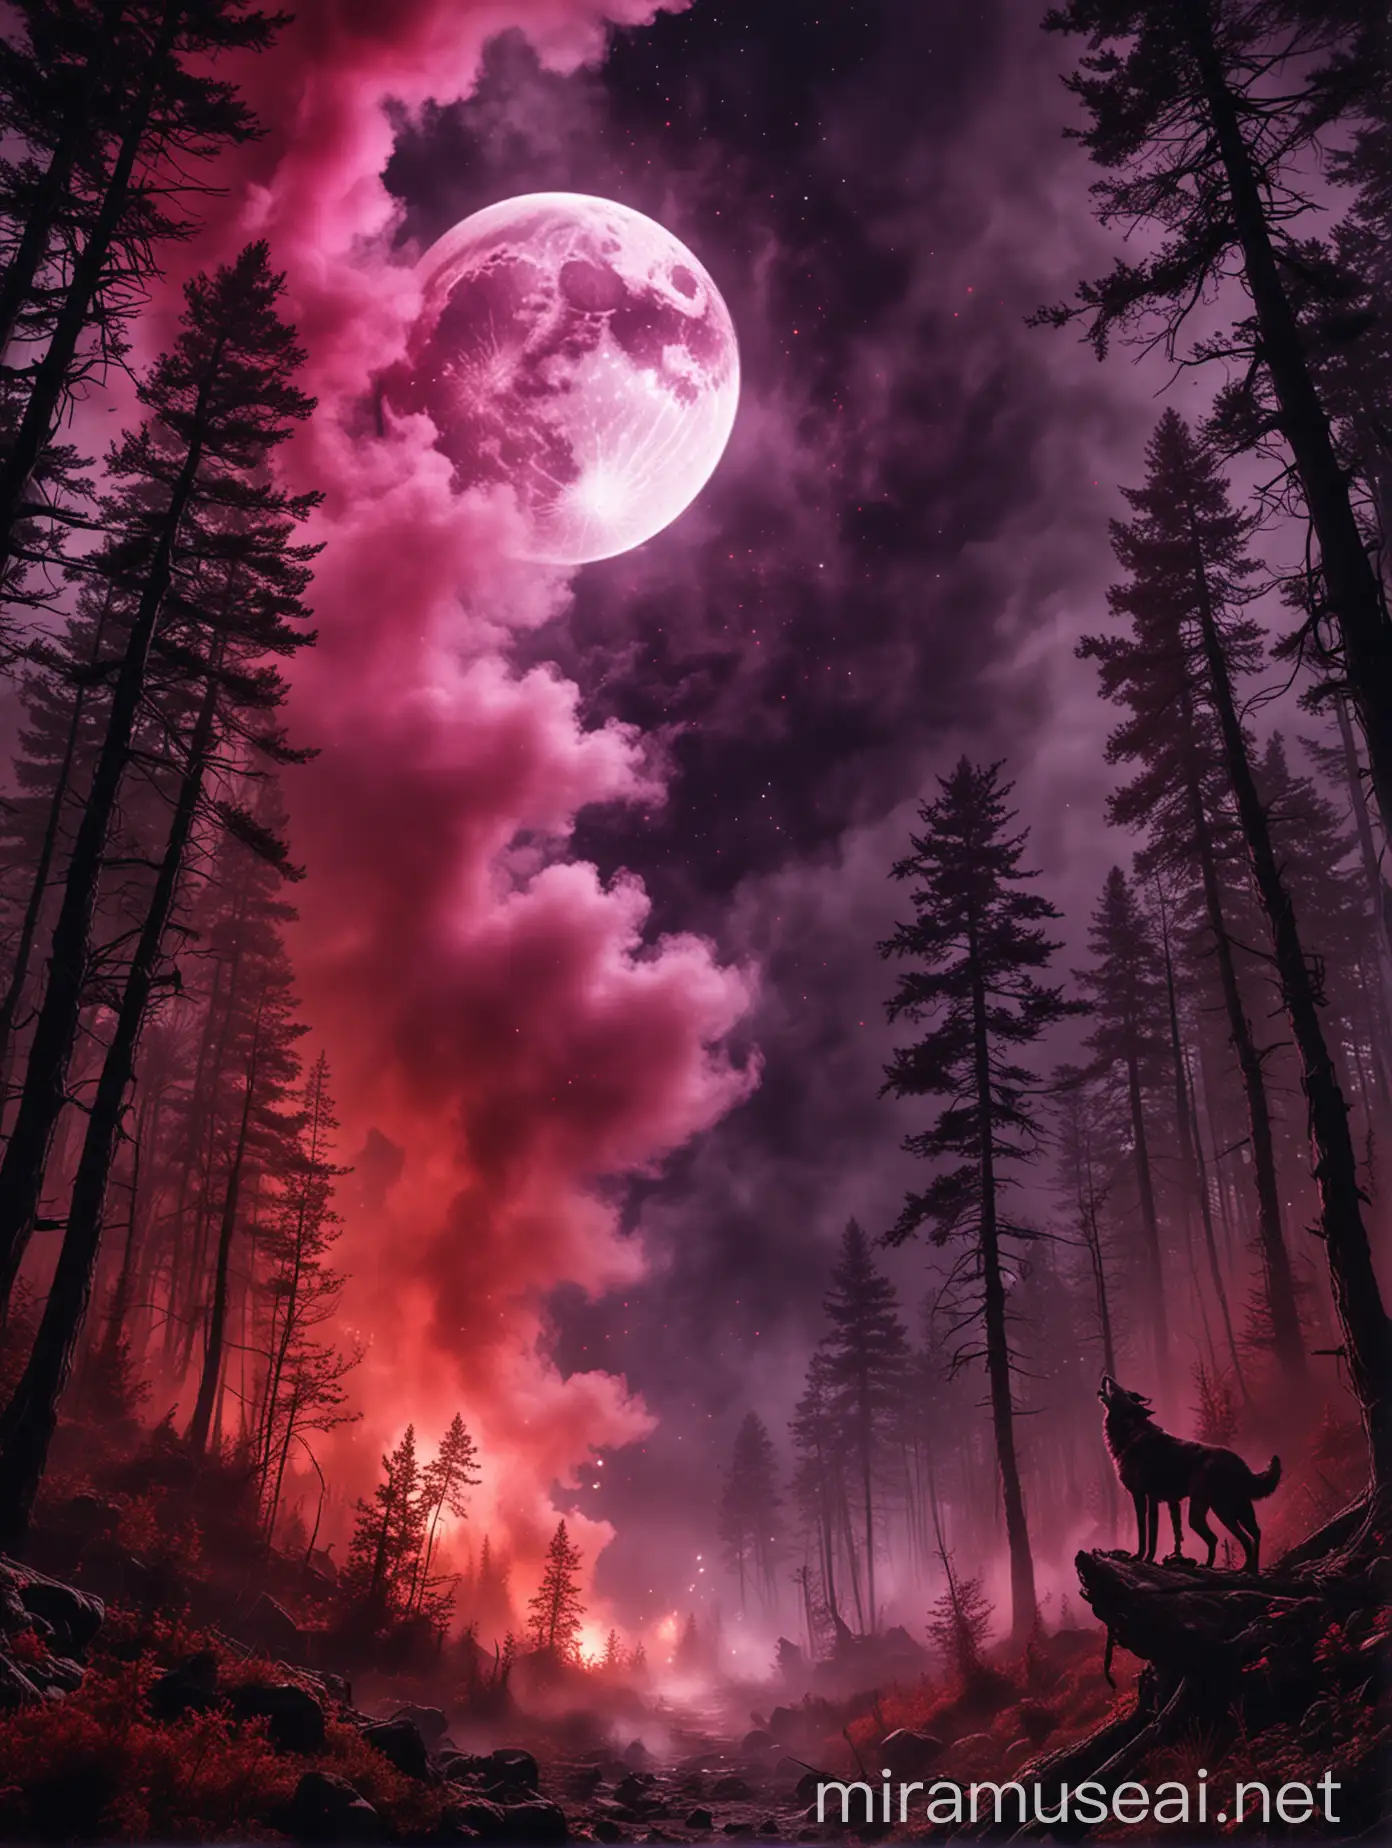 A moon in the sky with darkness around, and red and purple smoke engulfing everywhere in the forest, with werewolves emerging out